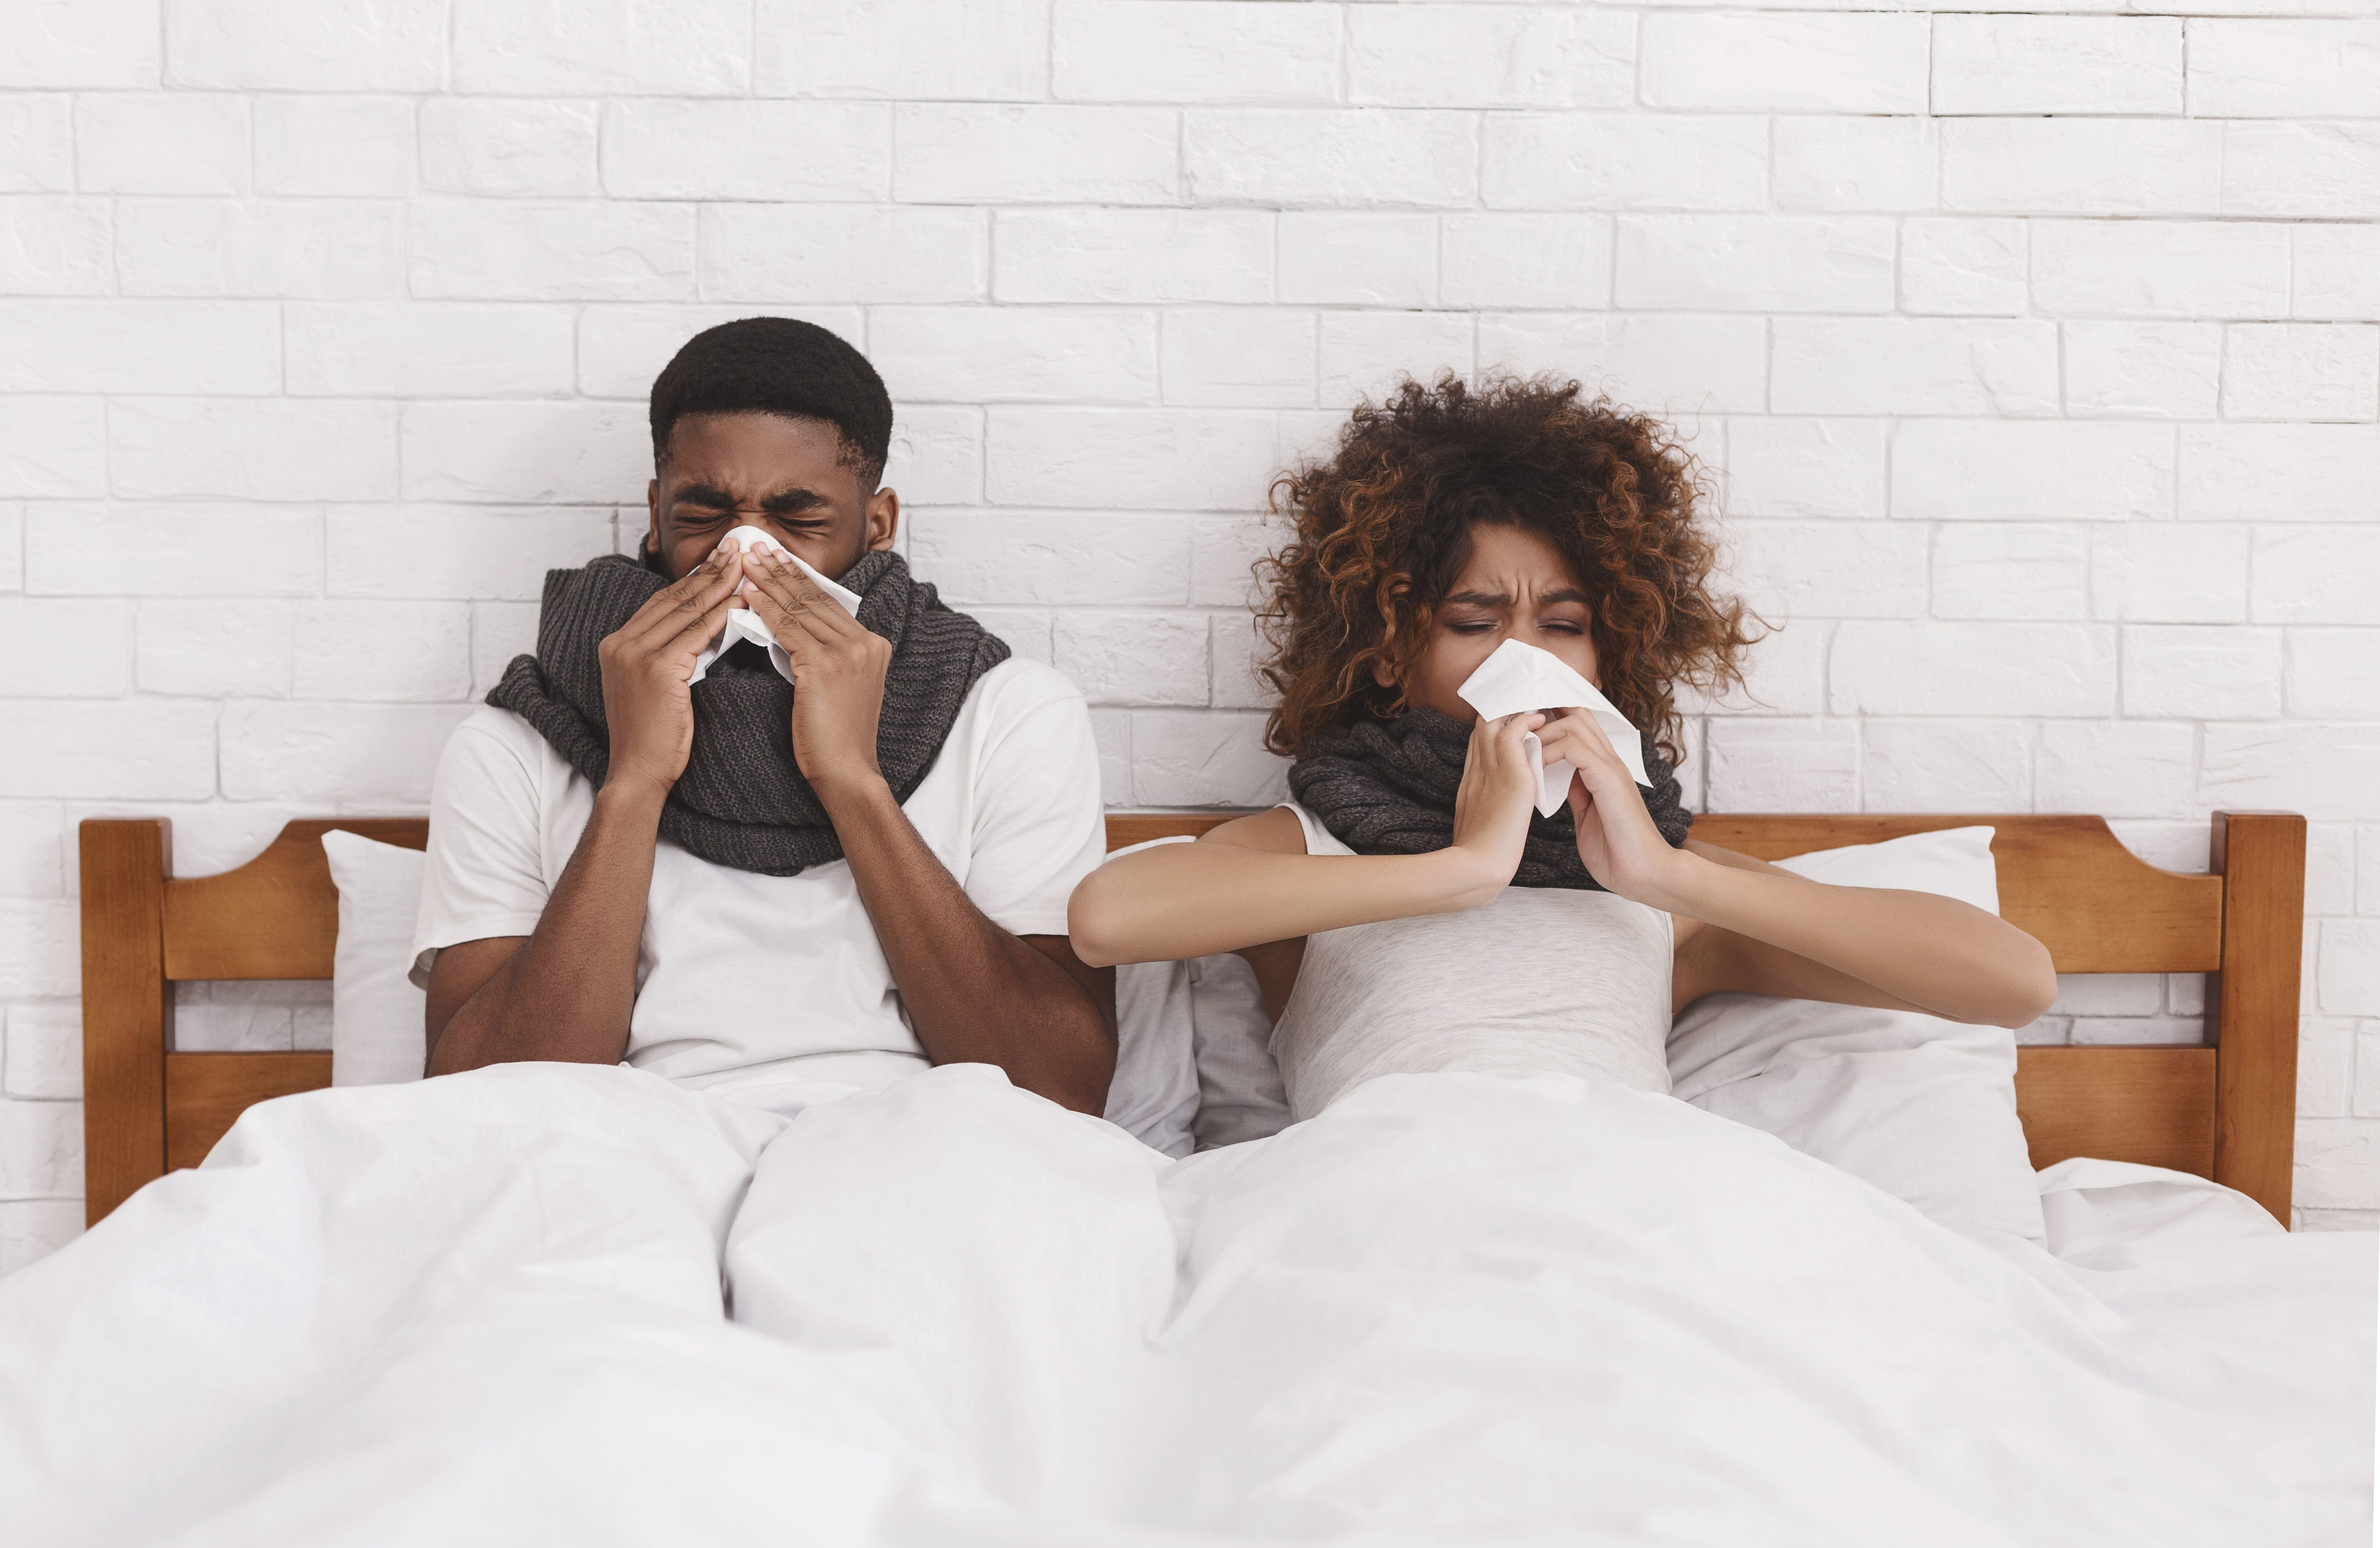 6 Answers to Common Cold Questions